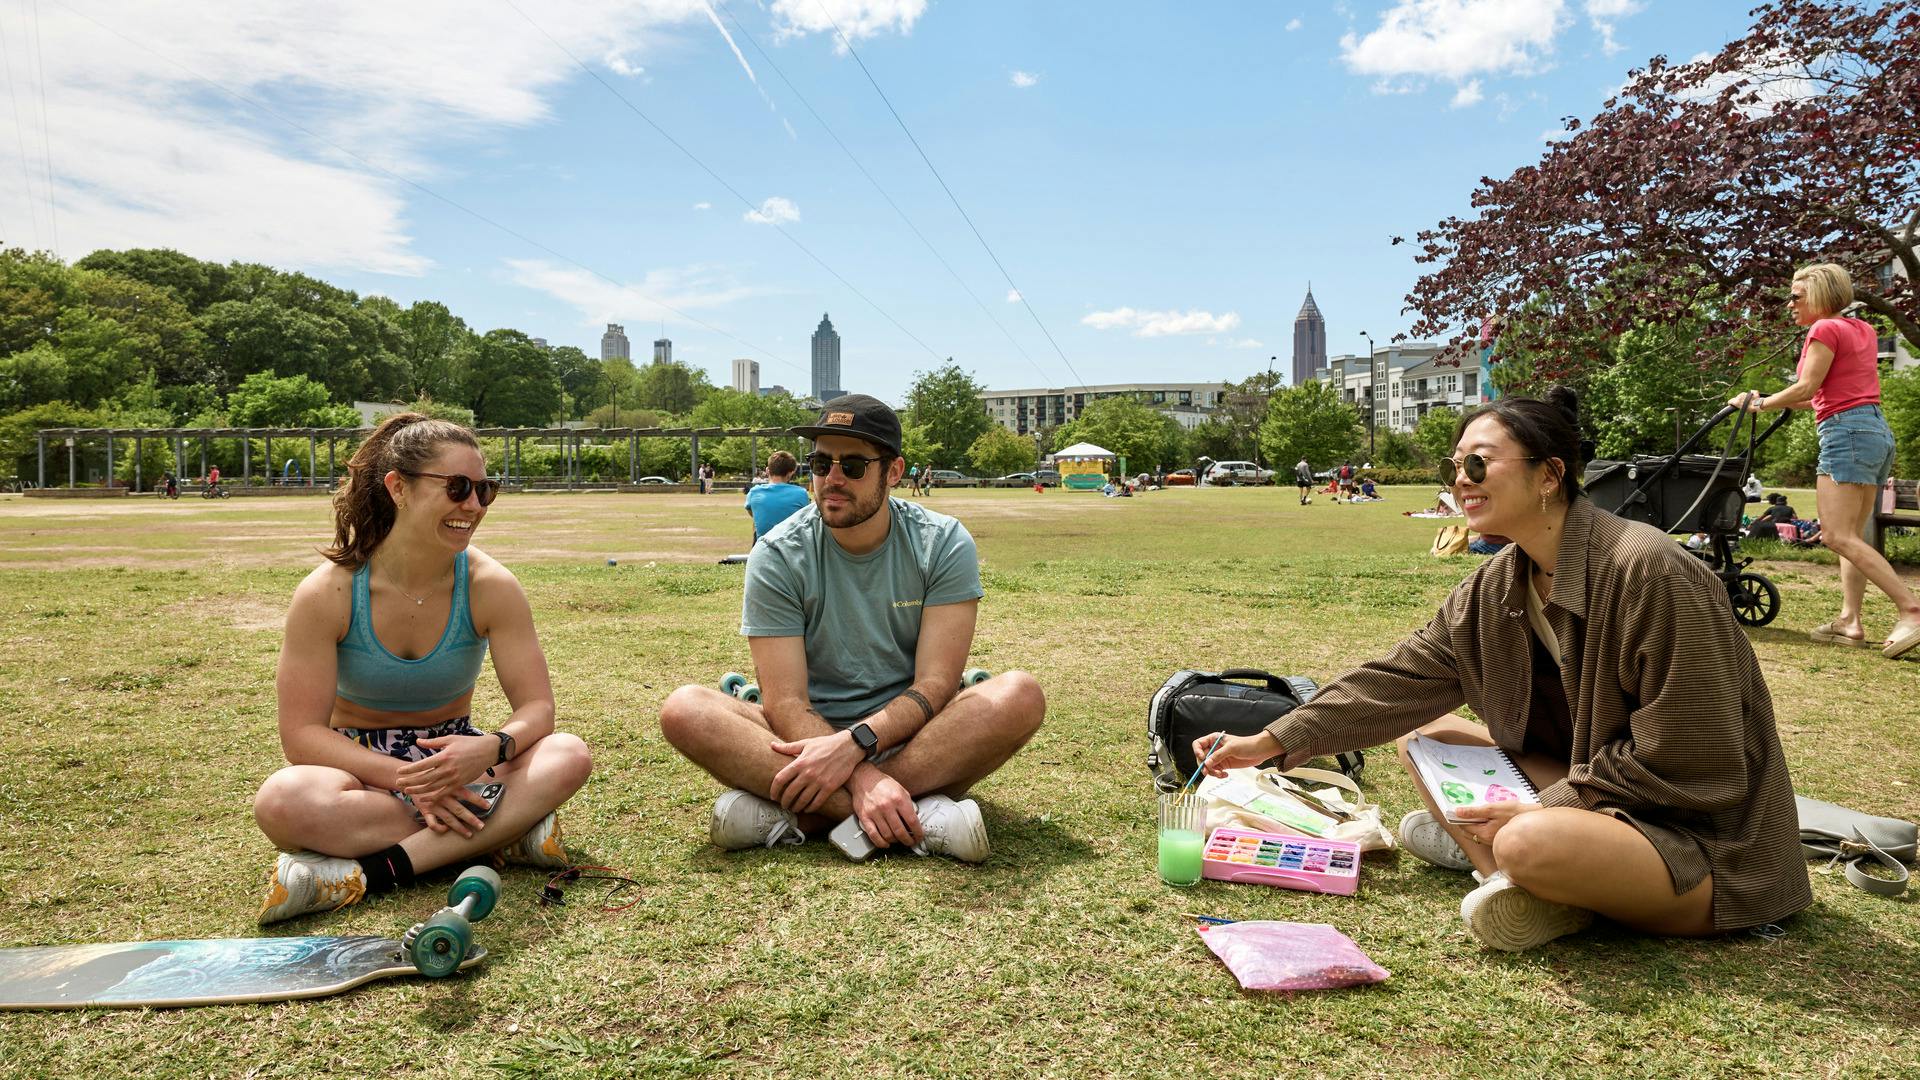 Three people sitting on the grass in a park, enjoying a sunny day together.